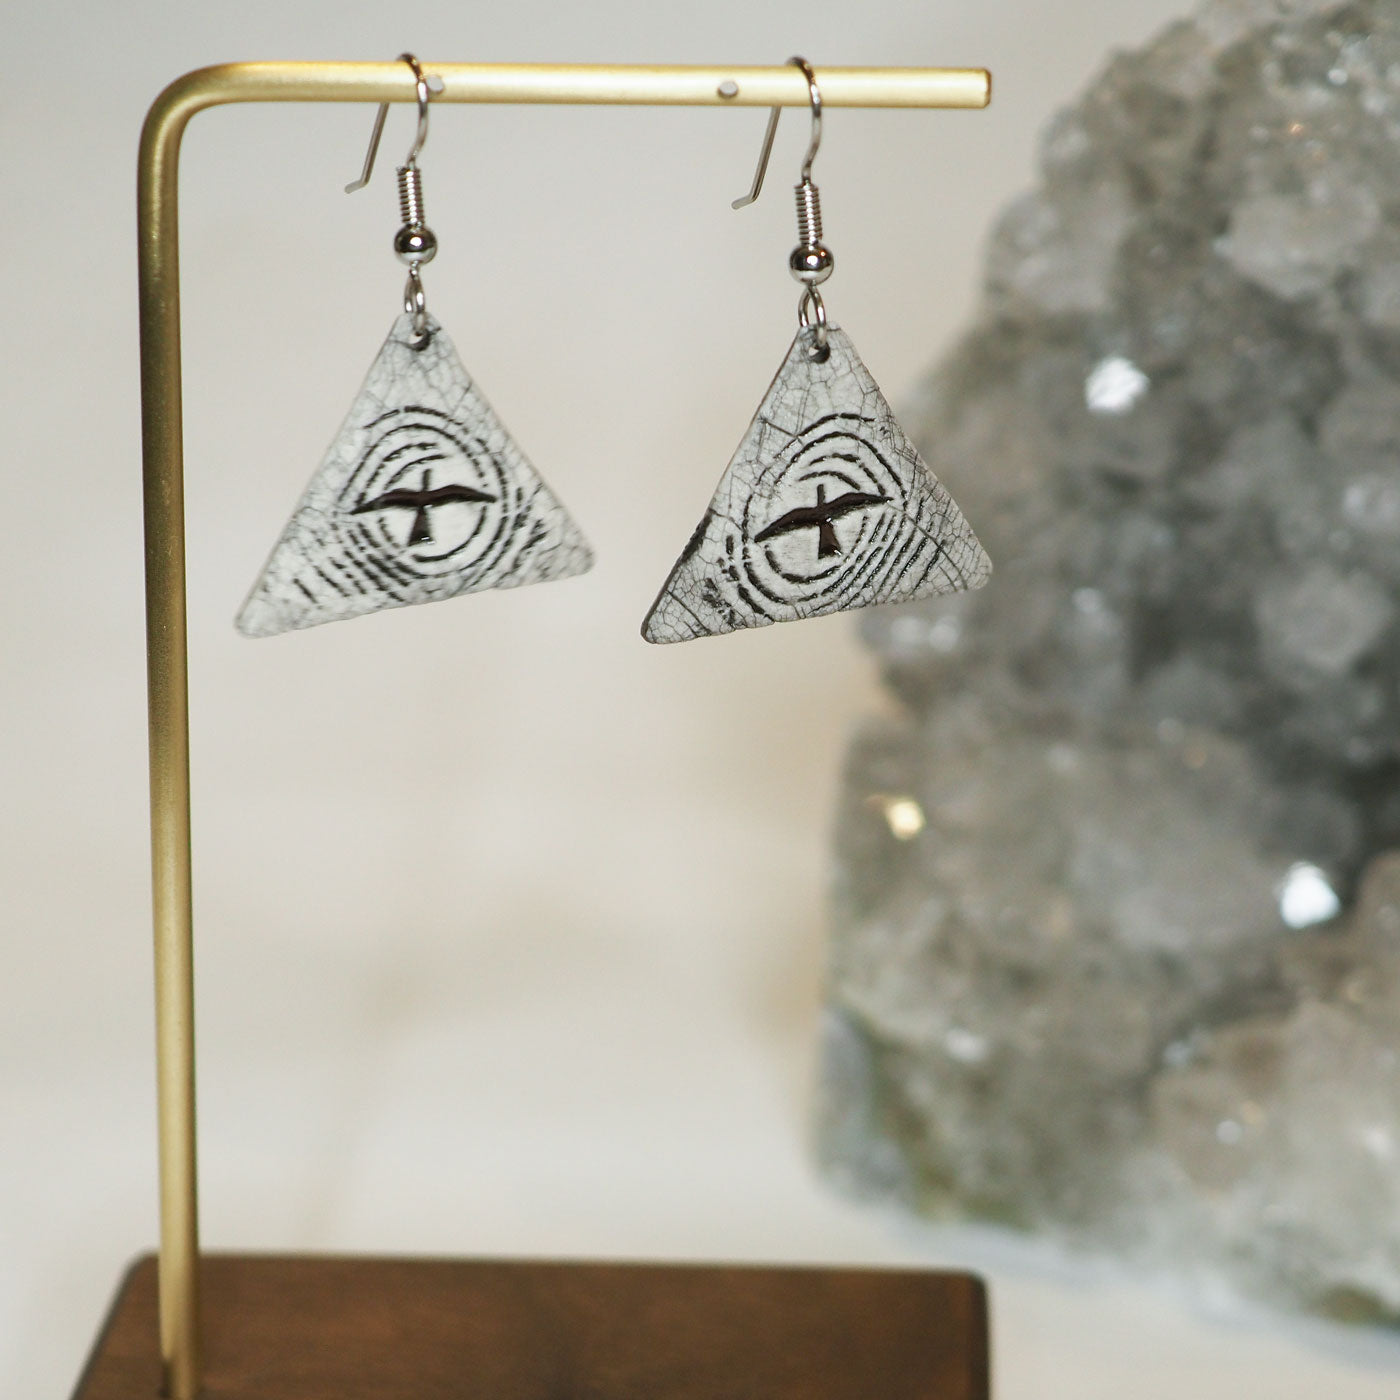 Hand-made triangular ceramic dangle earrings featuring a flying bird silhouetted against a stylized moon 